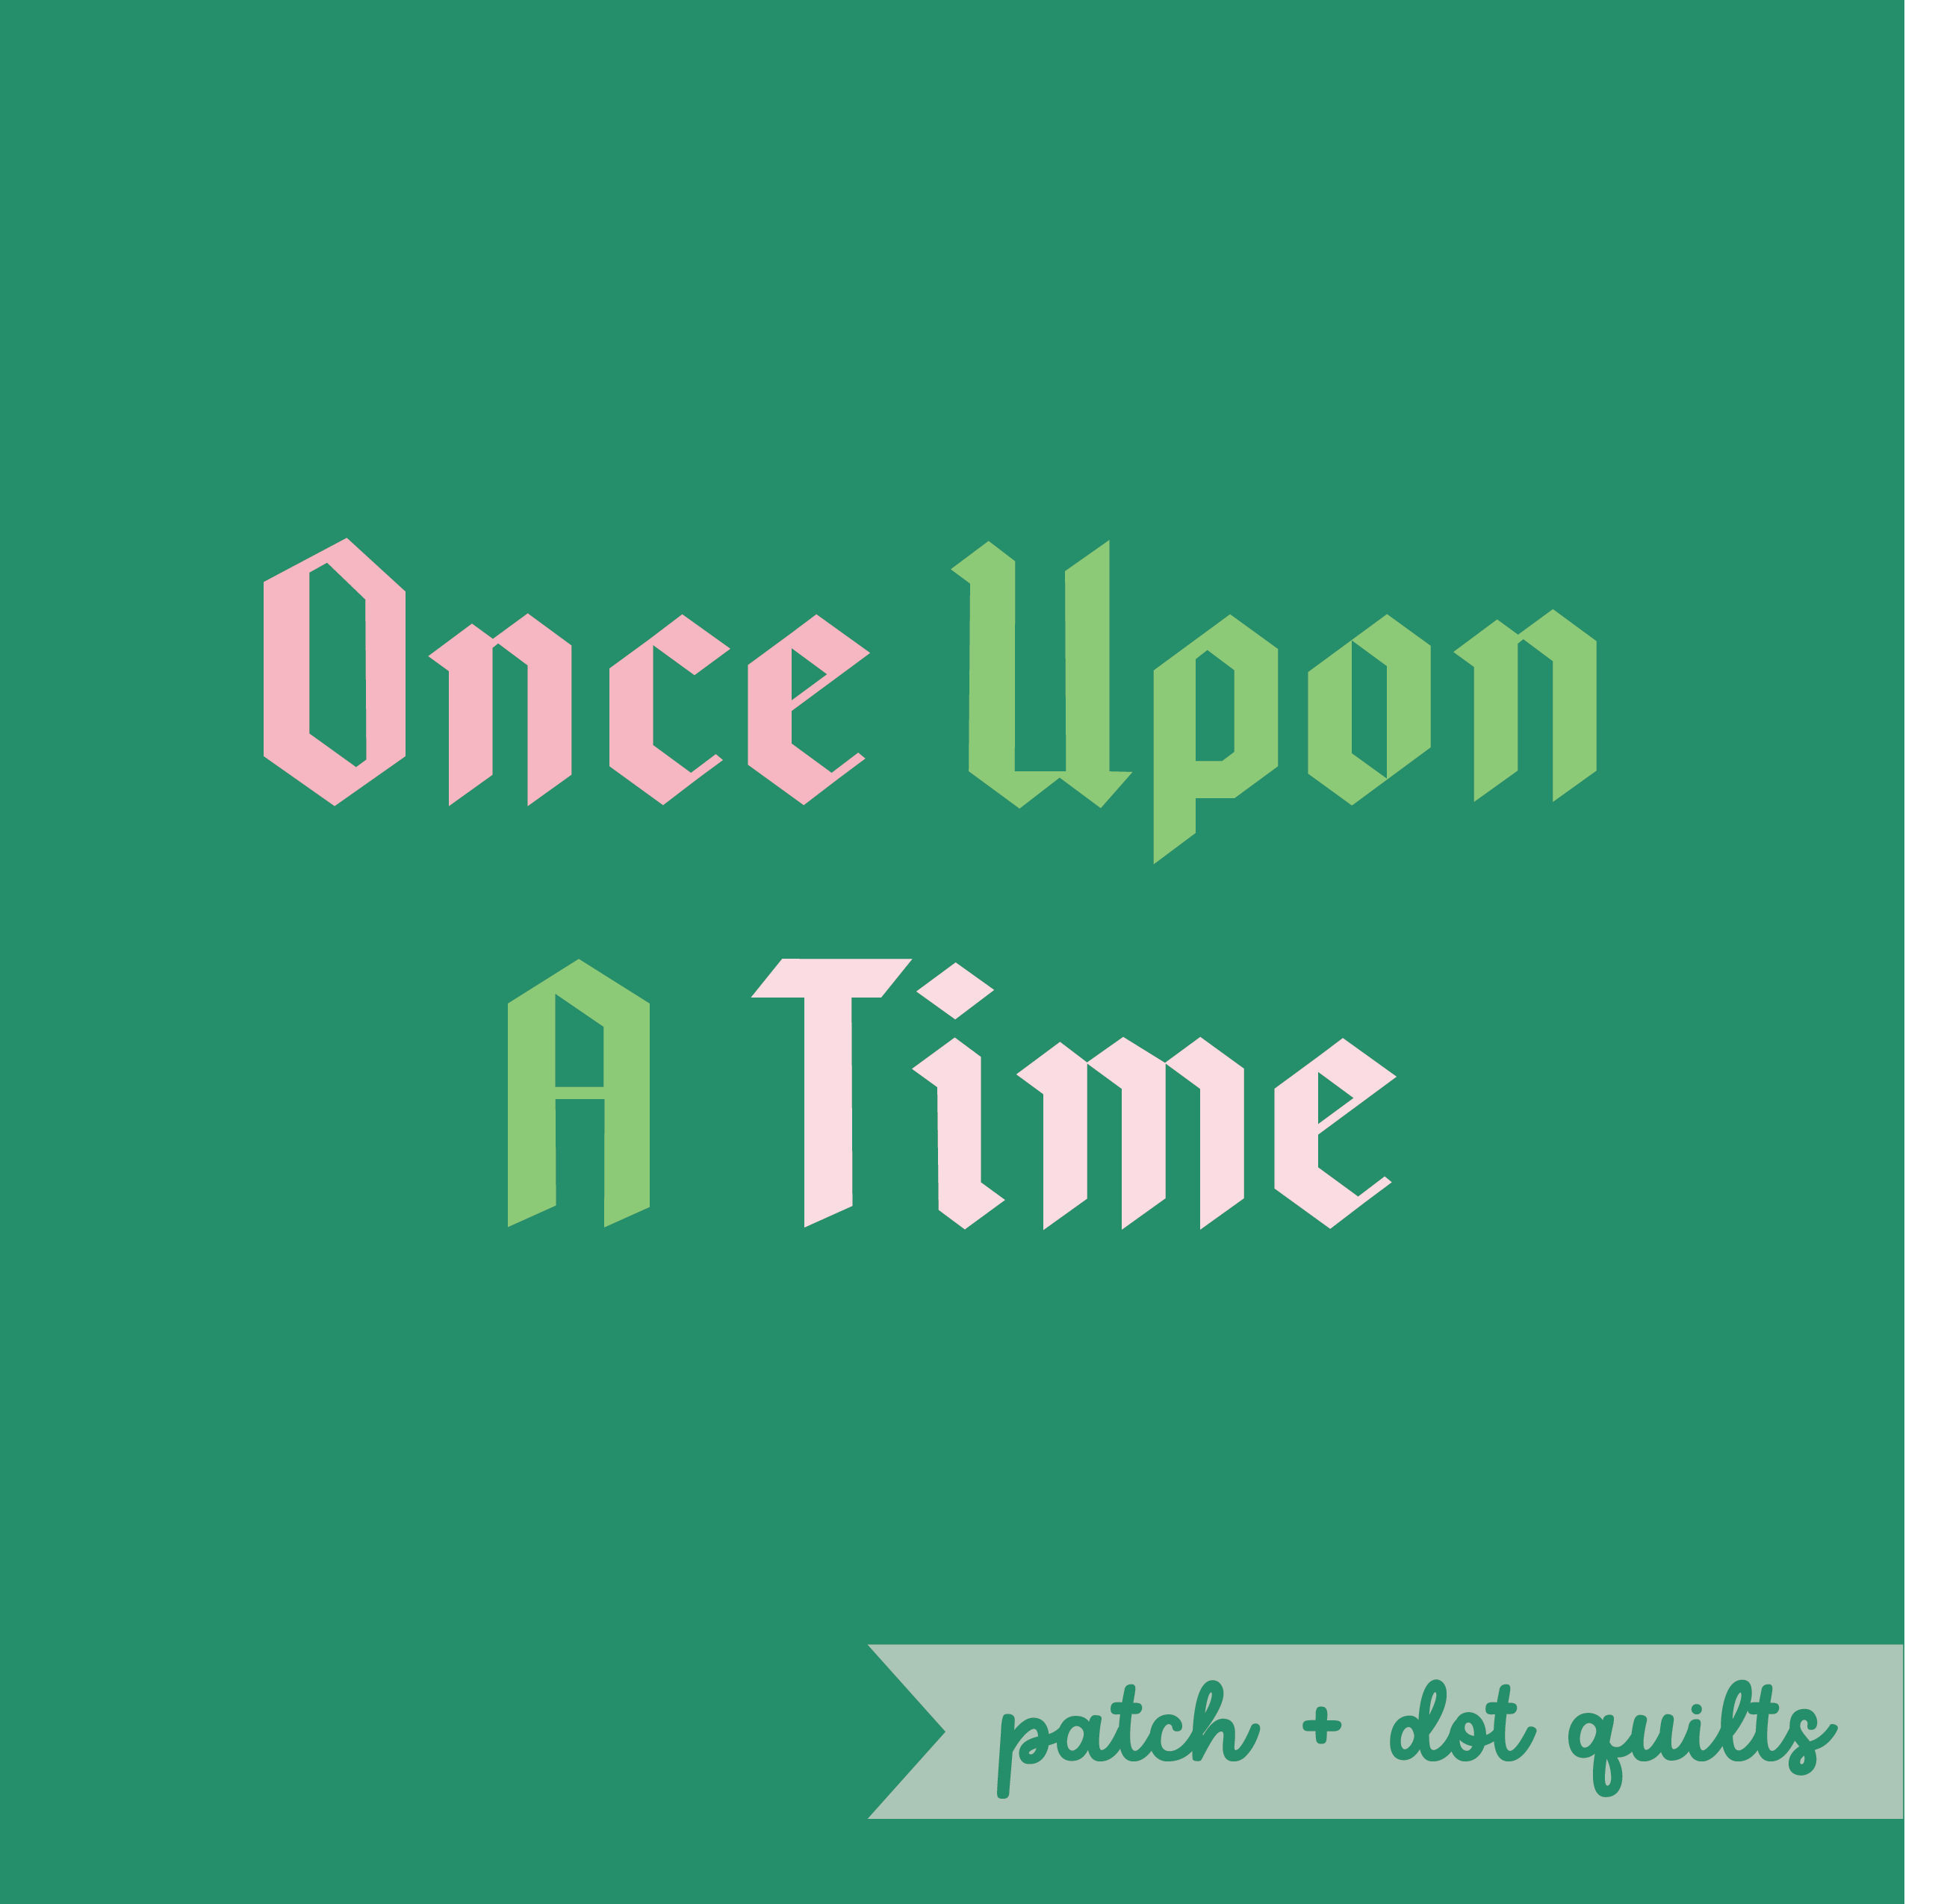 once-upon-a-time-pd